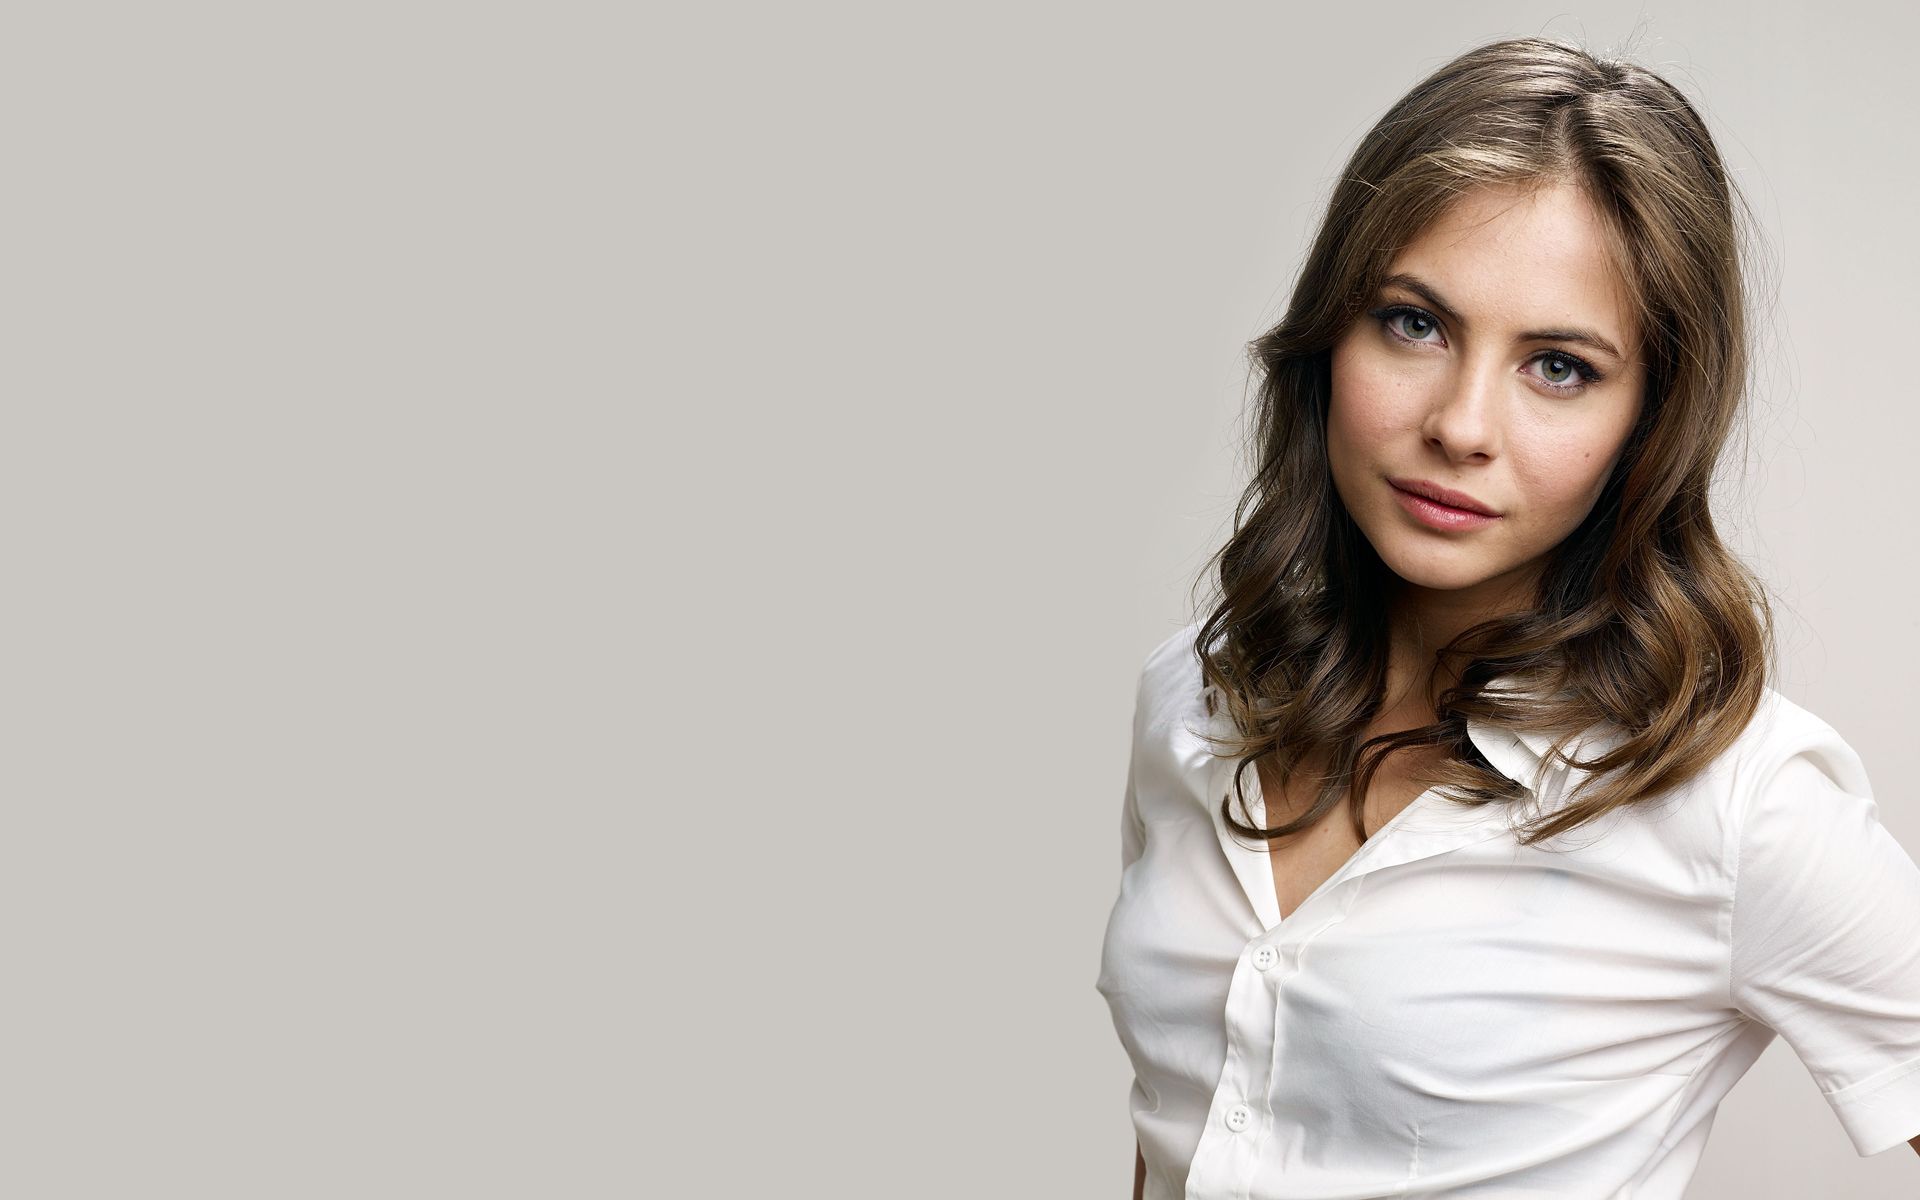 Willa-Holland-in-White-Shirt-Wallpapers.jpg